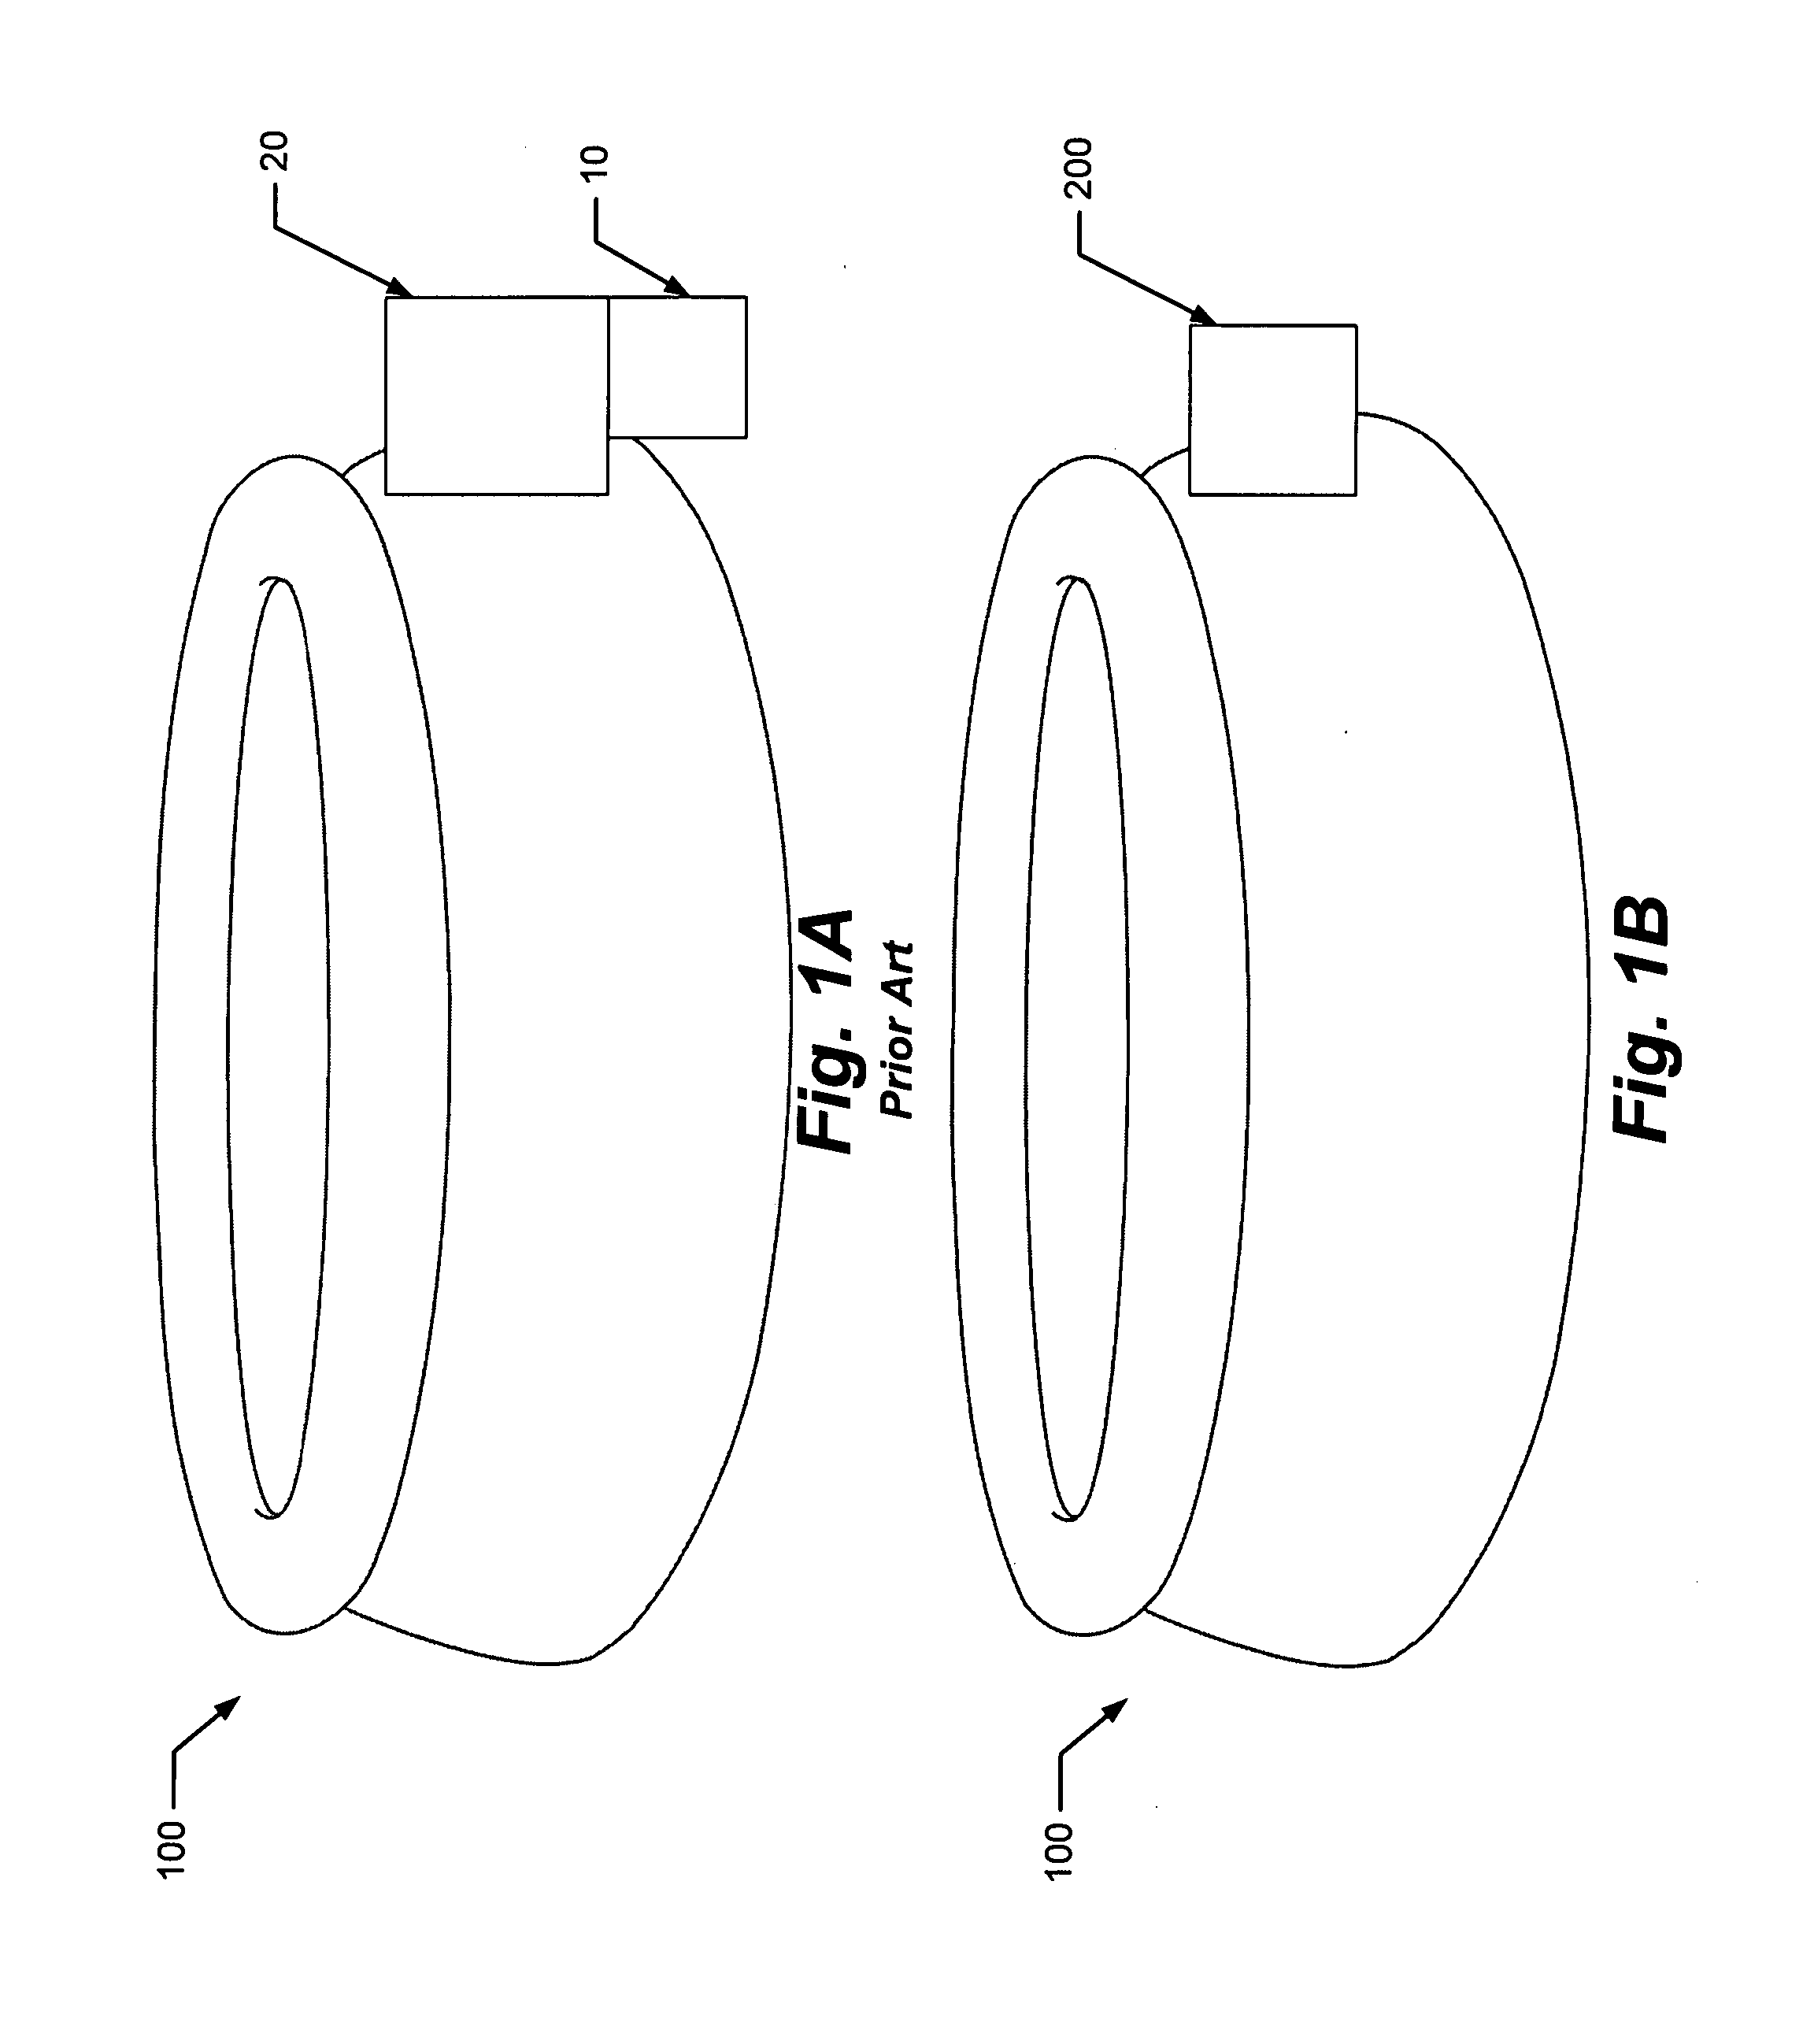 Cleaning system for above-ground container and methods thereof